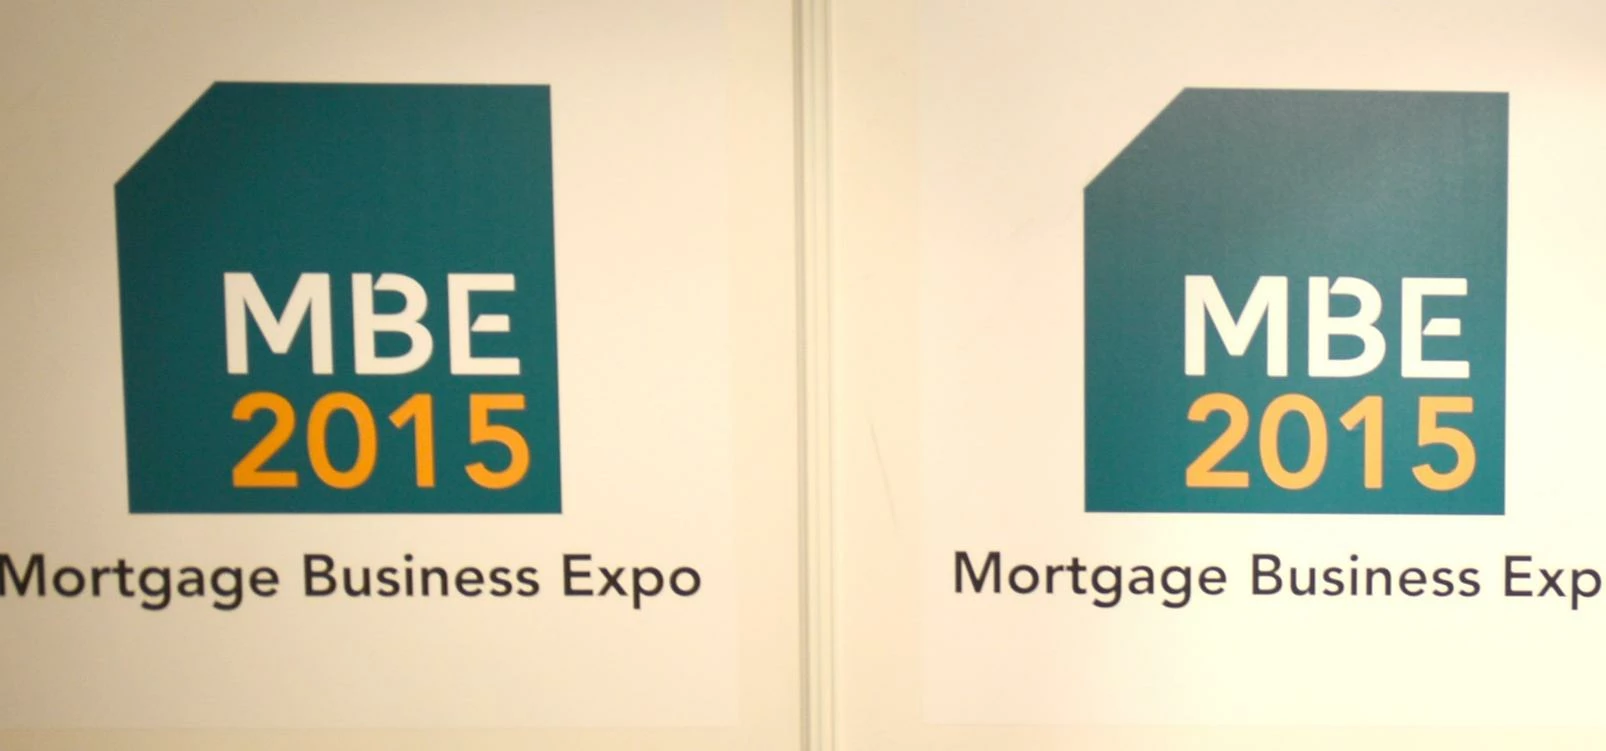 Mortgage Business Expo, Bristol 6th July 2016